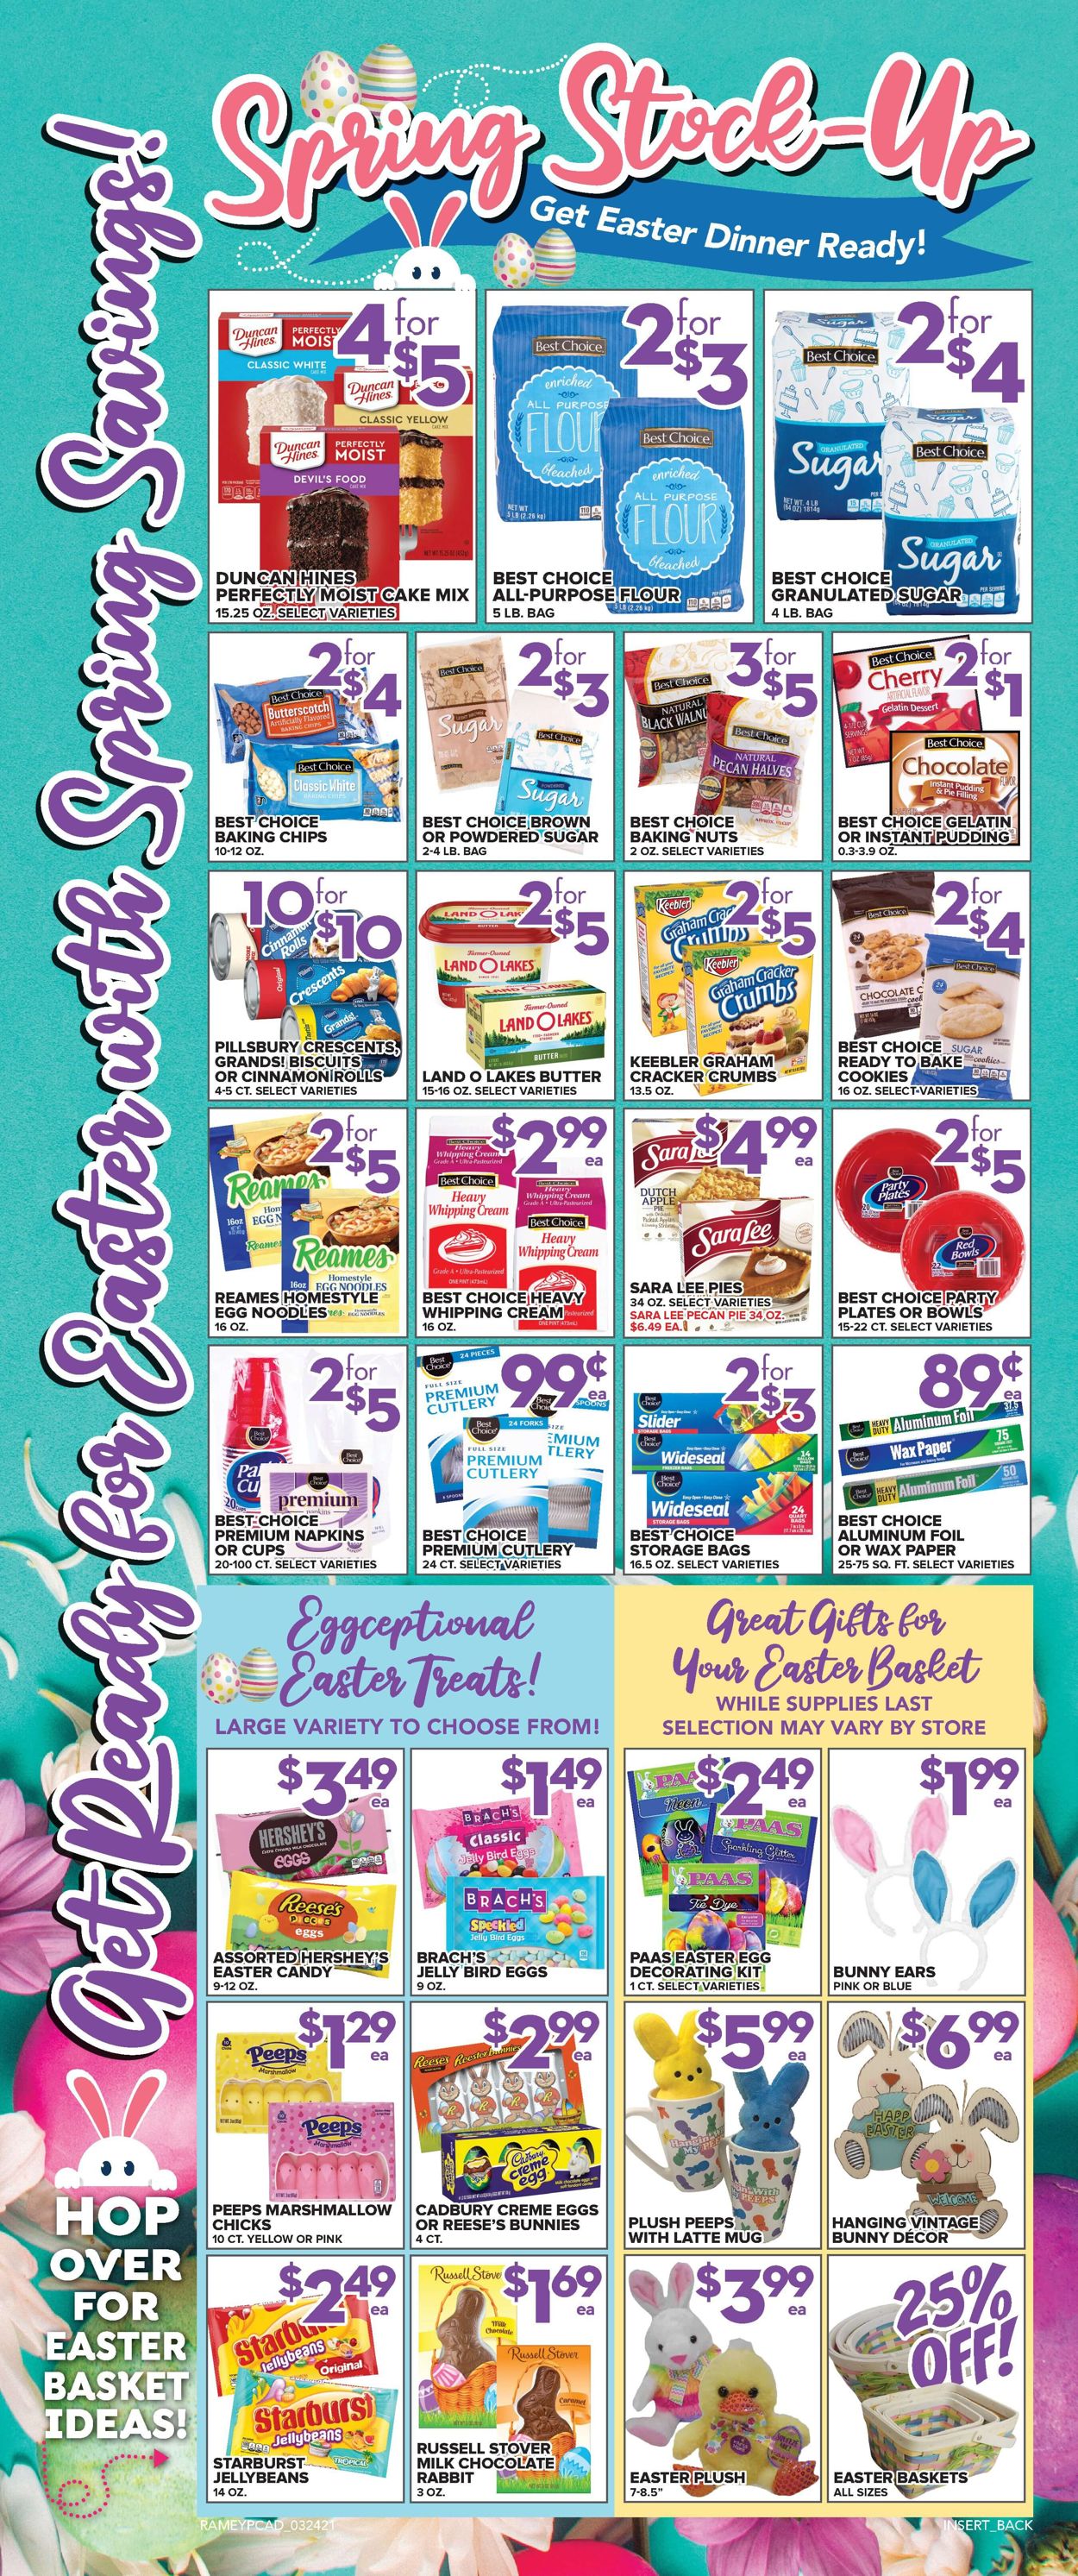 Price Cutter - Easter 2021 Ad Weekly Ad Circular - valid 03/24-03/30/2021 (Page 6)